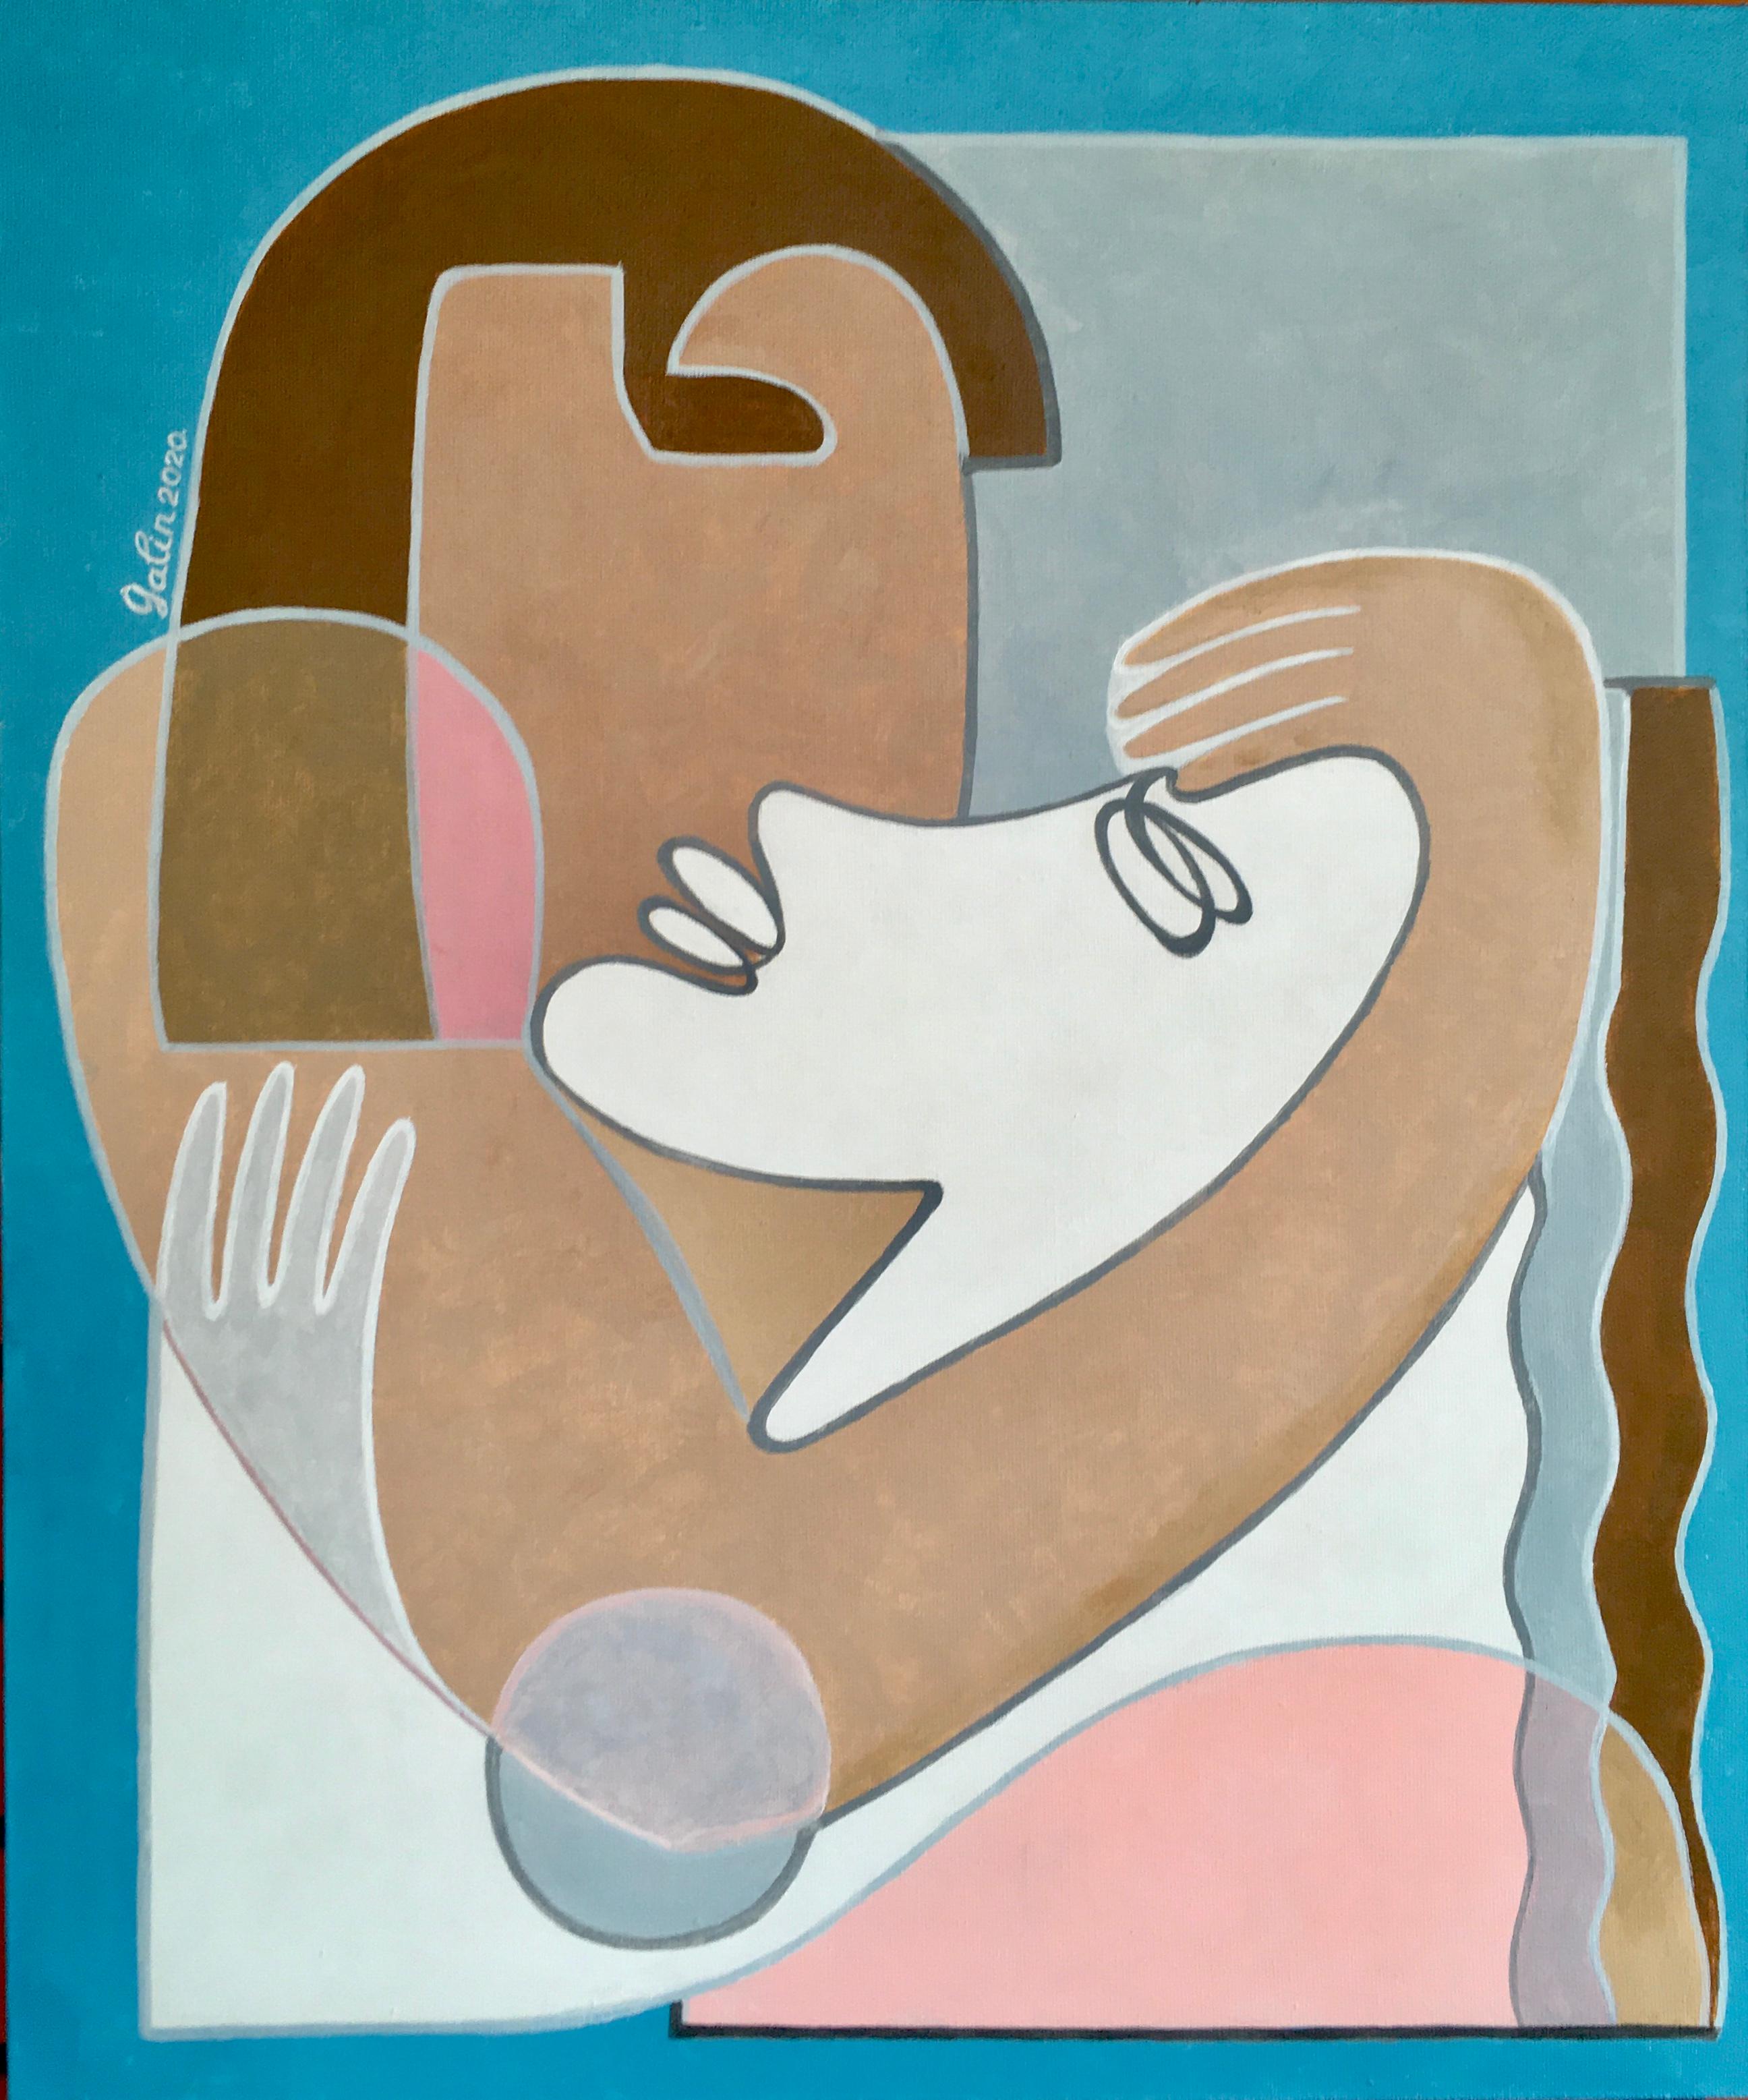 Couple-abstract nude girl with a boy, made in turquoise, beige, pink, brown color